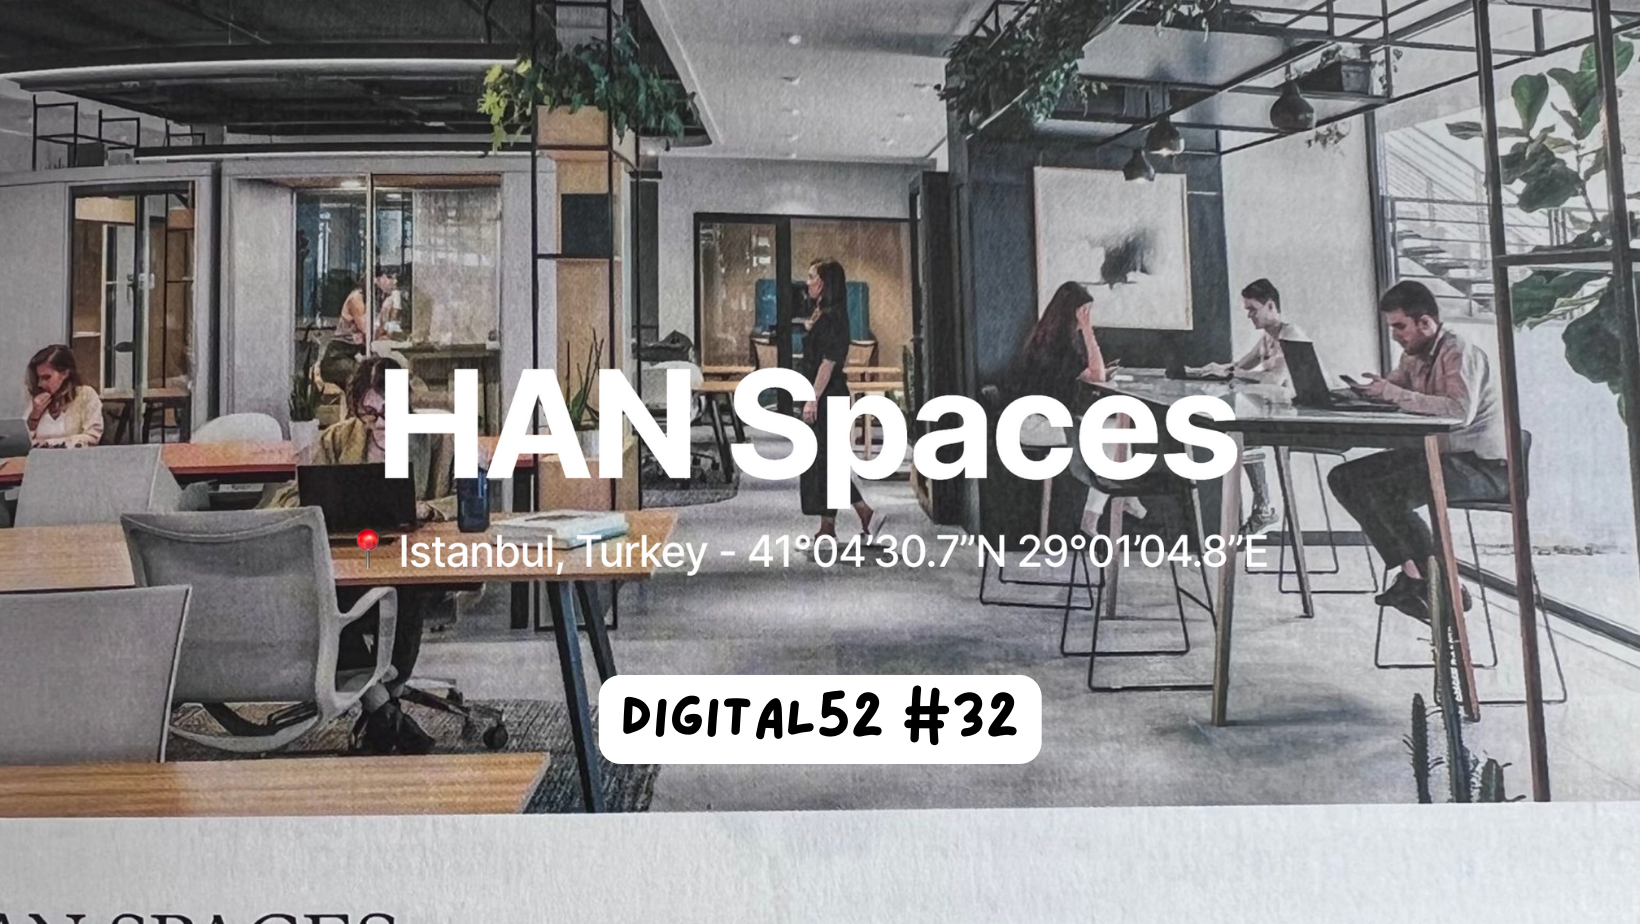 Essential Insights for Coworking in 2024: 10 Key Findings from Digital52 Coworking Series